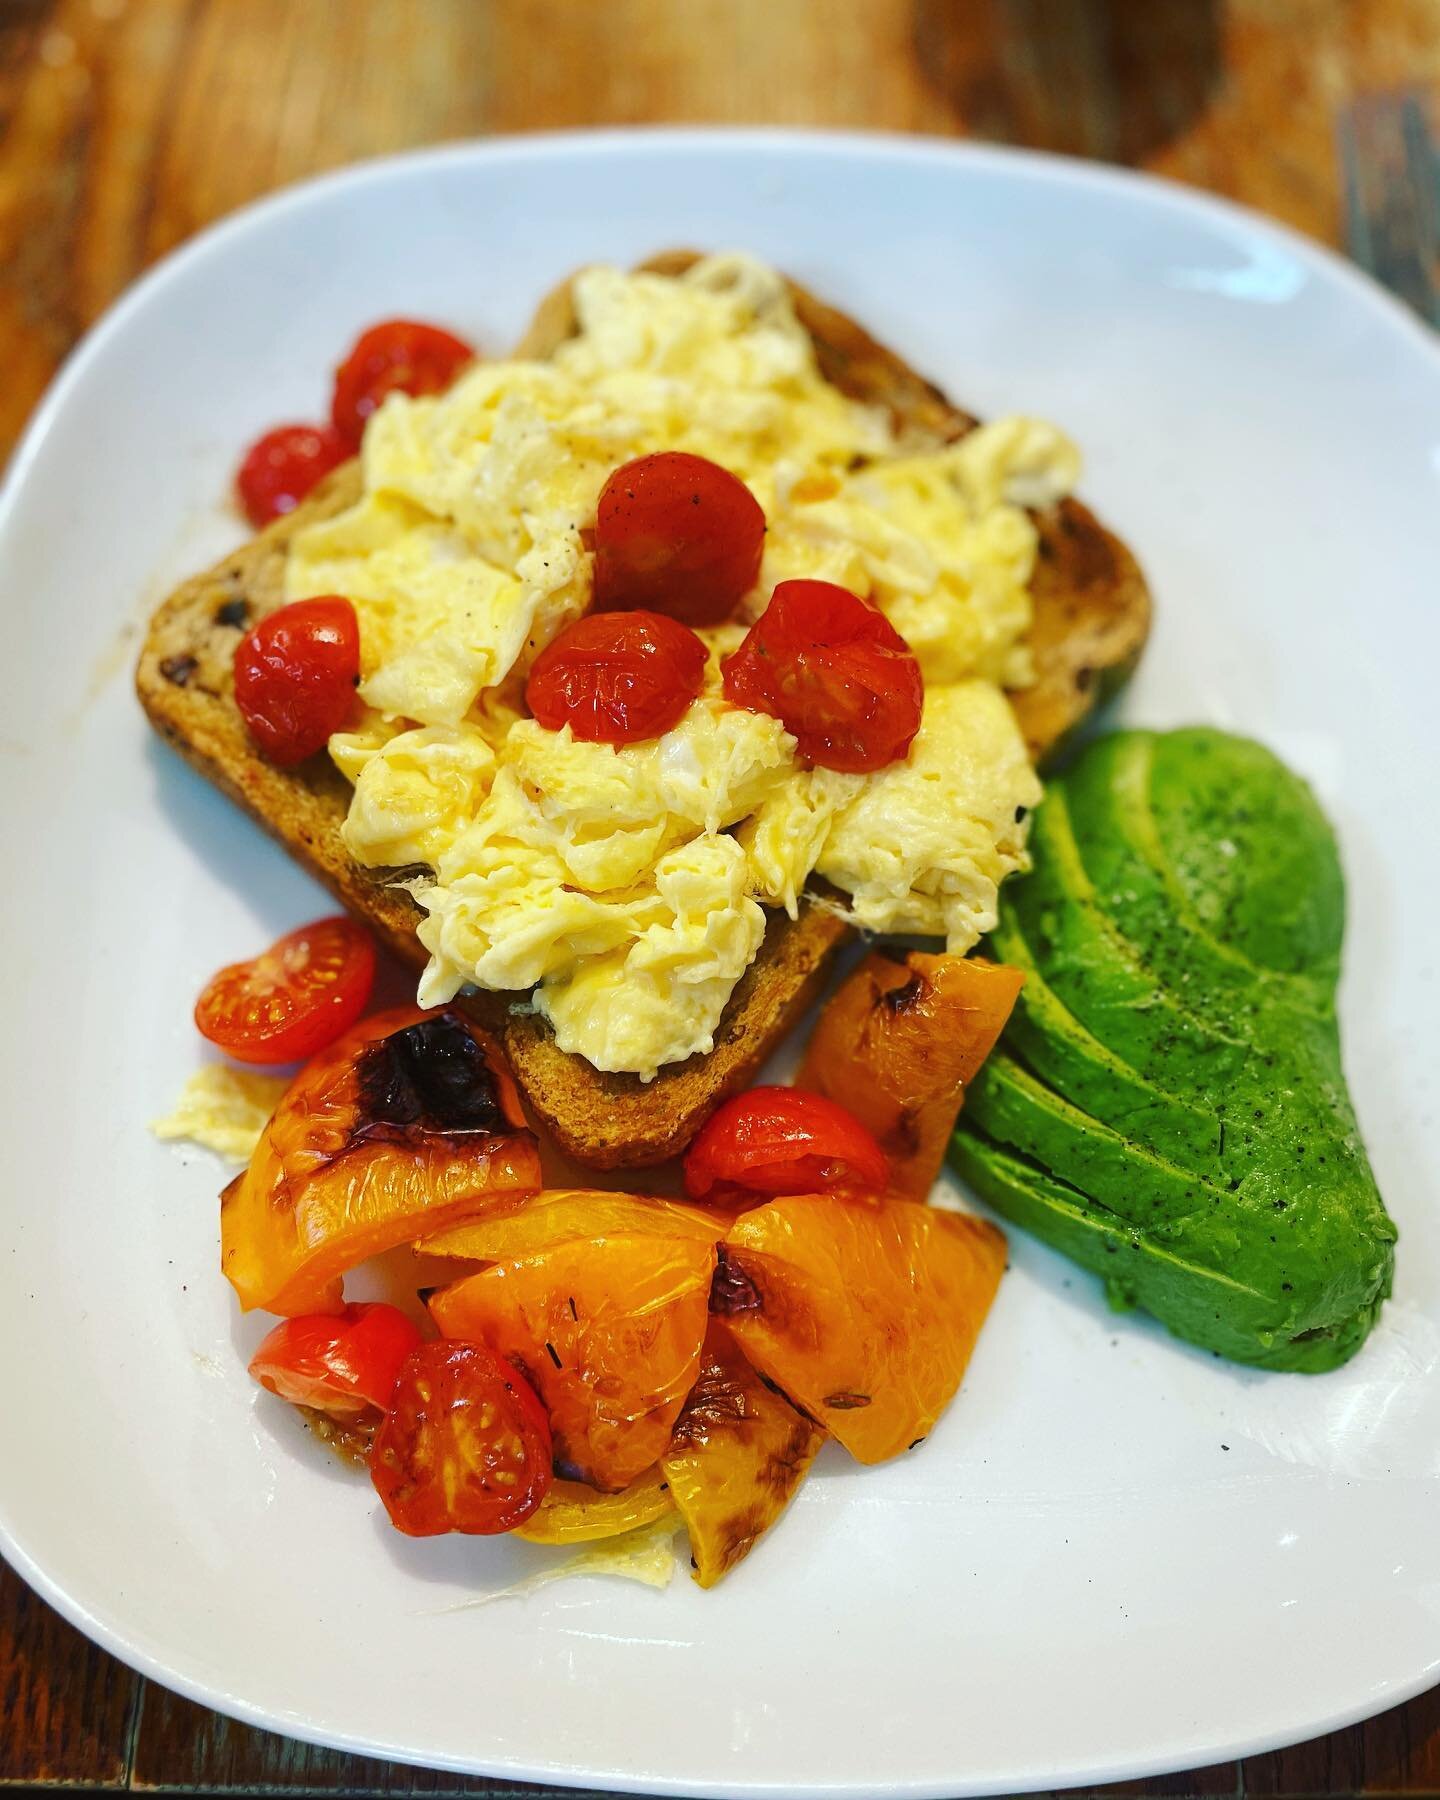 Healthy start this morning at @grounded_brothers 

Open today and tomorrow 😃

#breakfast #groundedbrothers #restaurant #foodie #eatclean #bromley